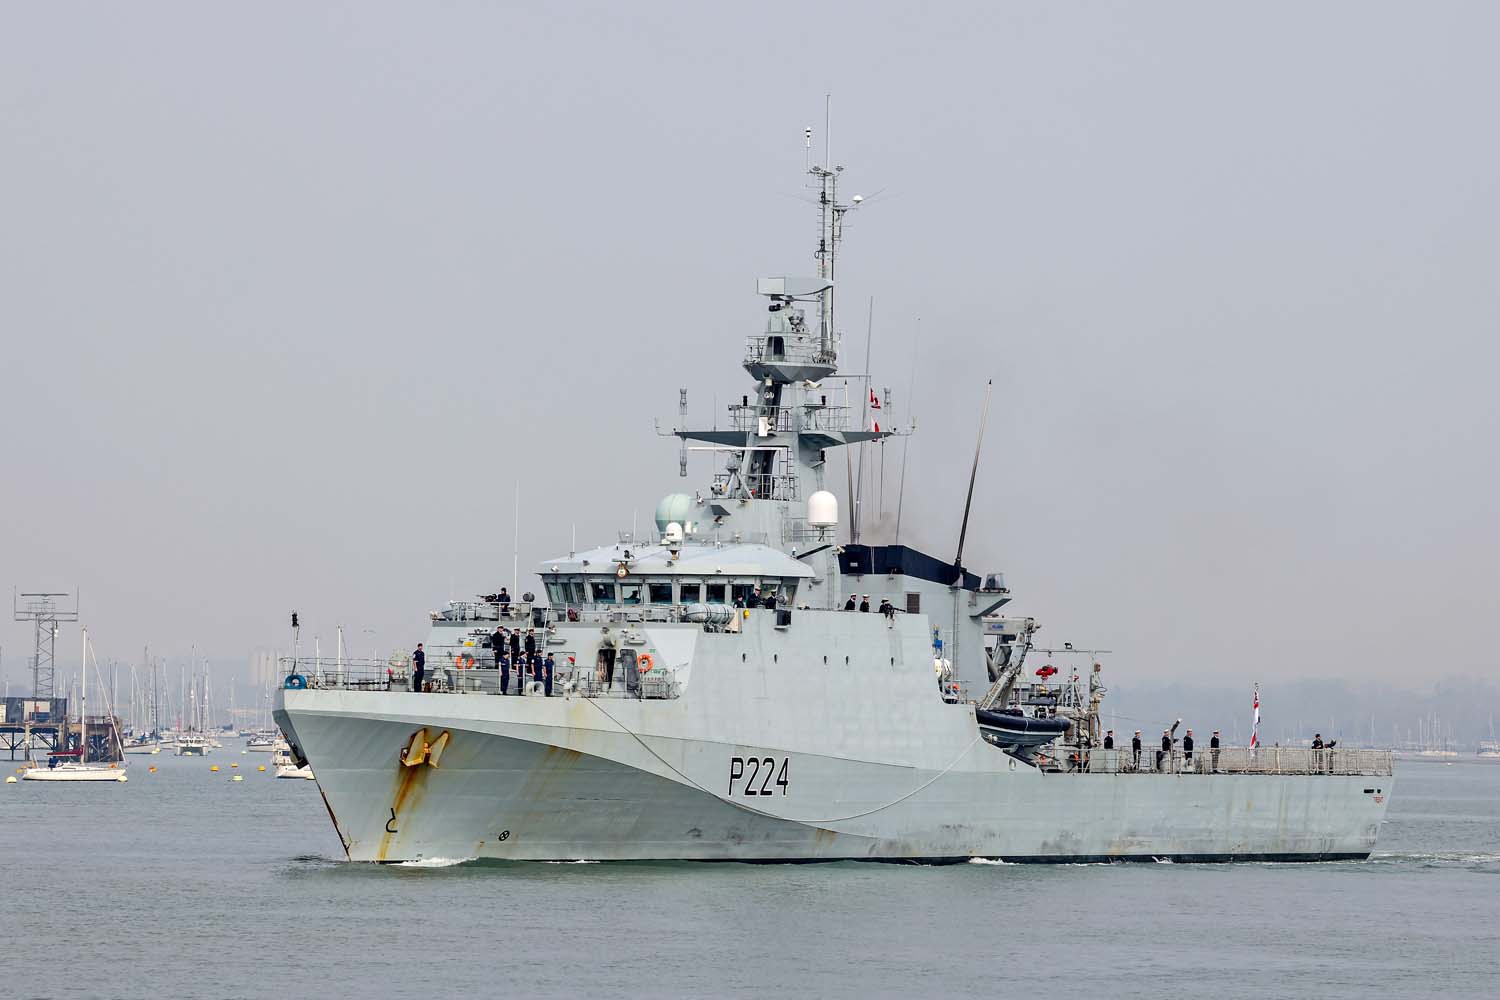 UK Royal Navy Ship to Conduct Gulf of Guinea Security Patrols